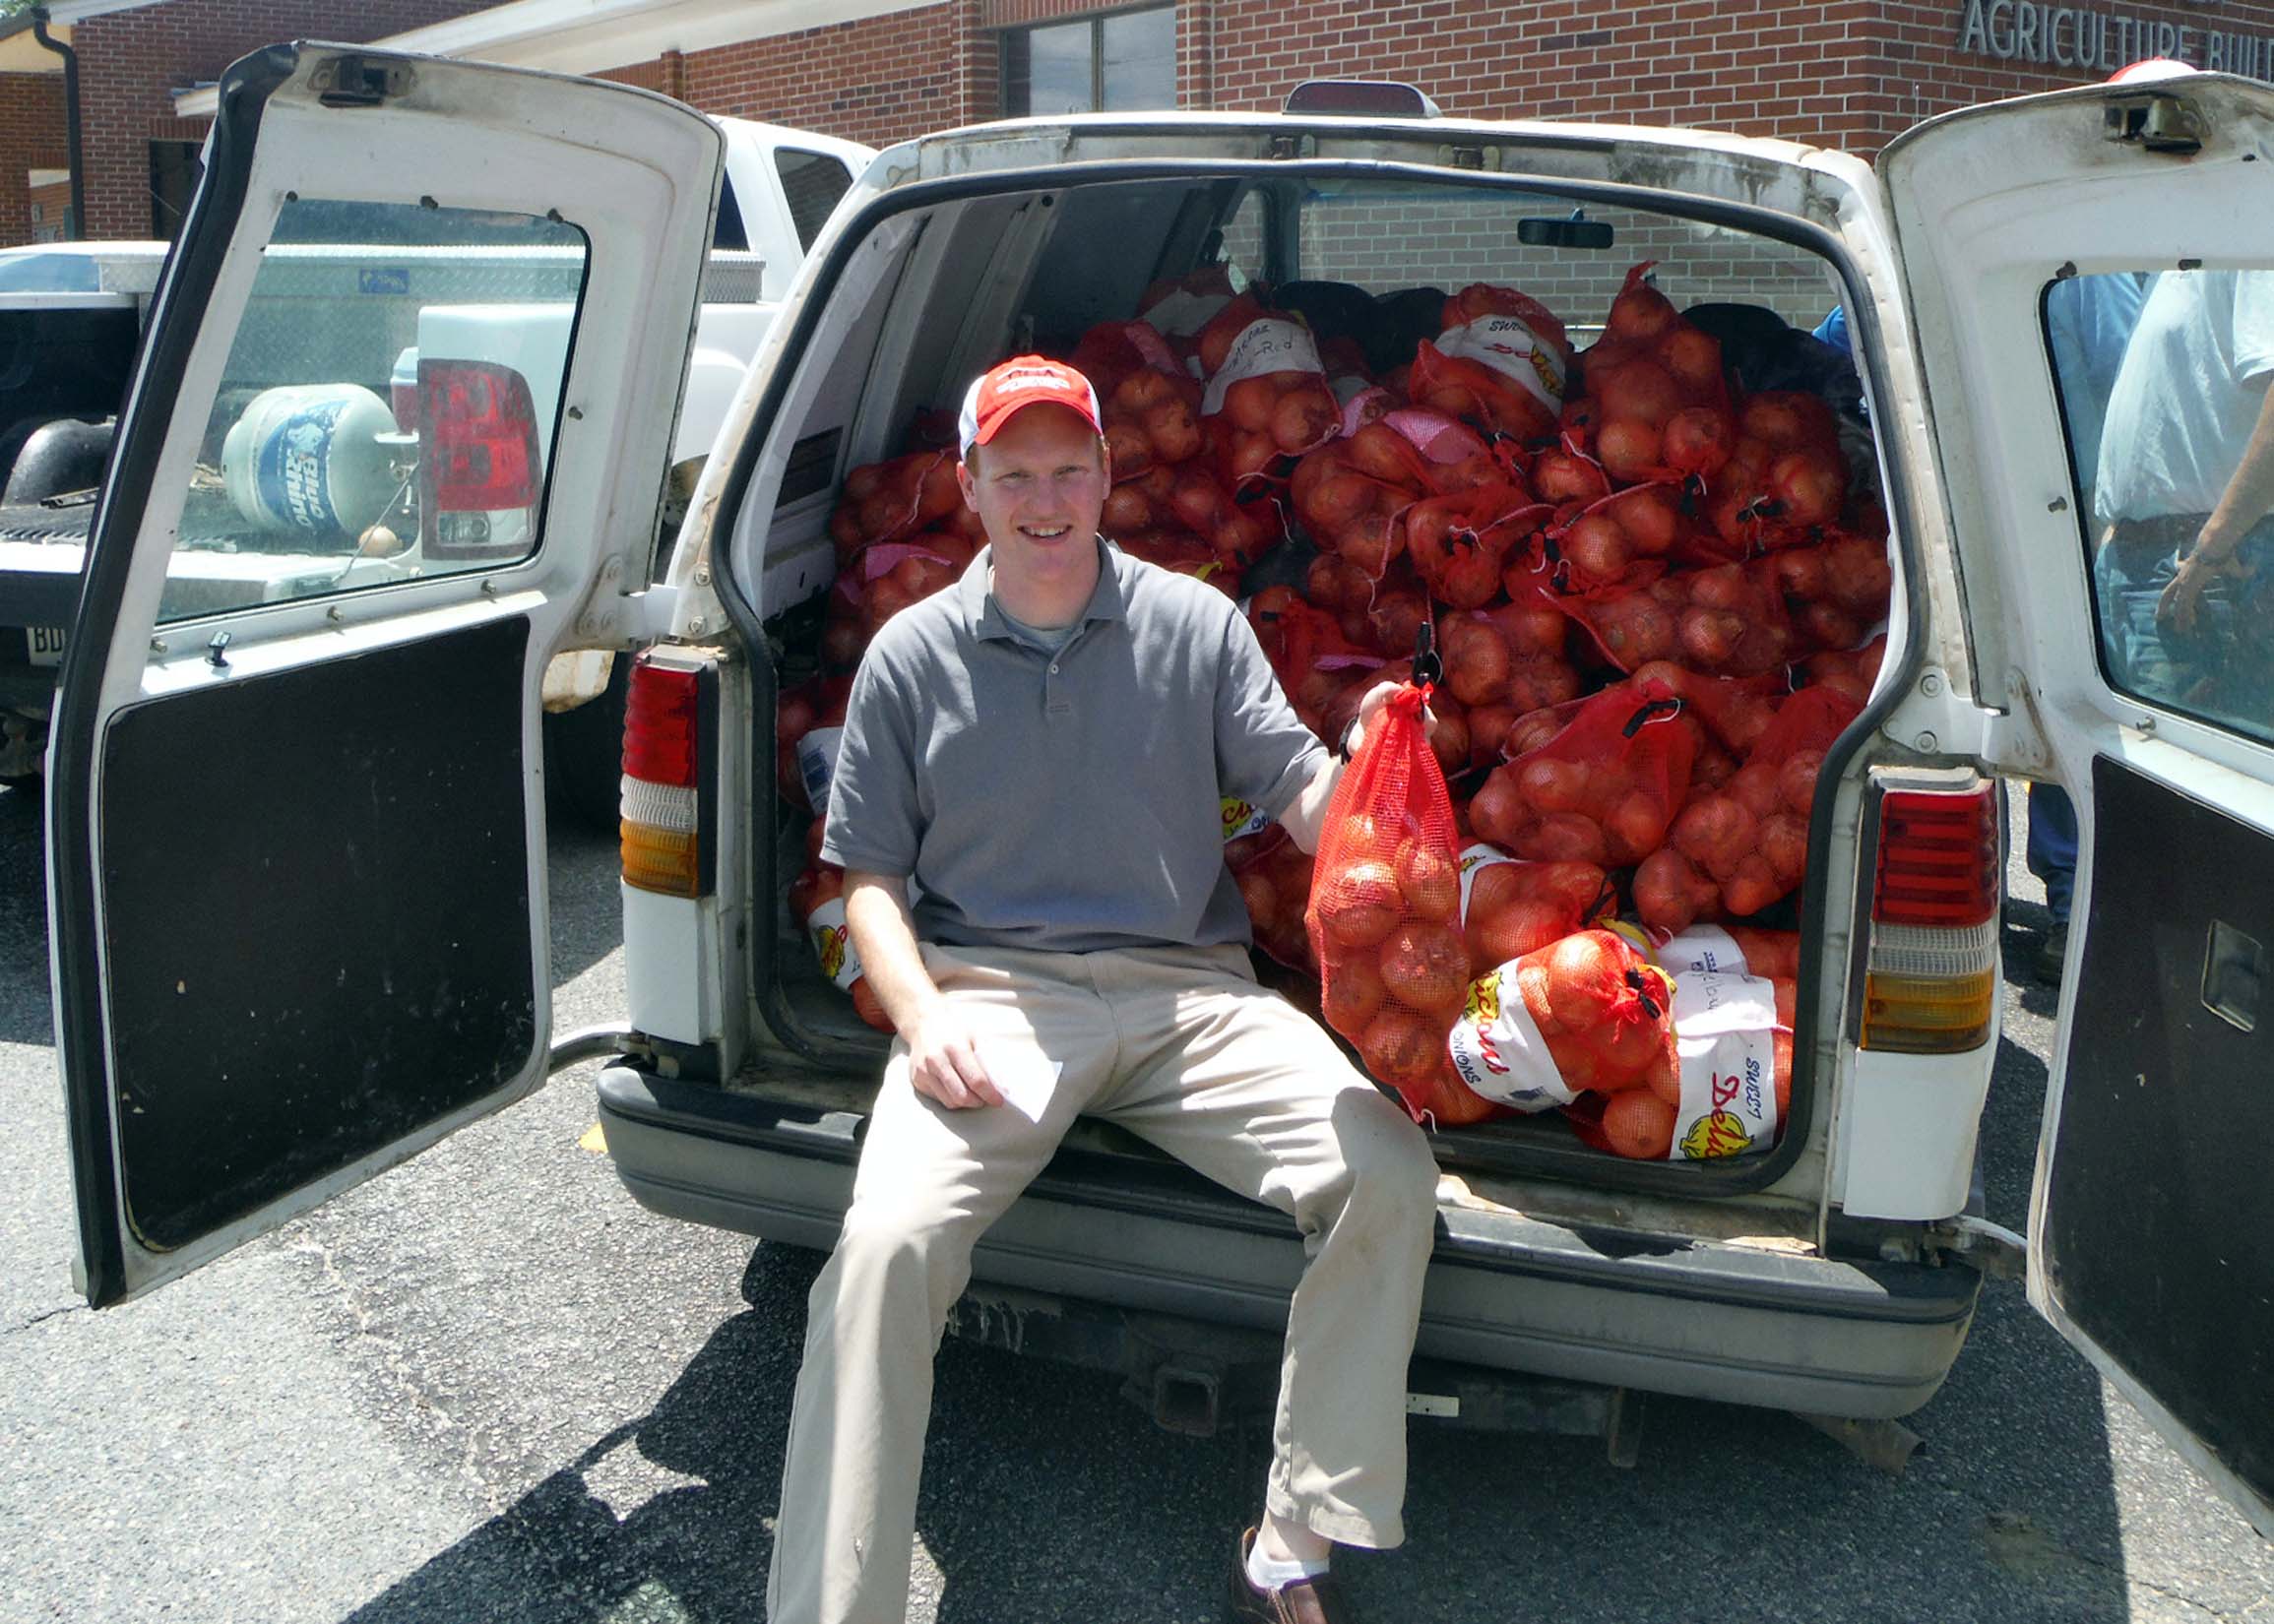 UGA Crop Quality Lab manager Daniel Jackson with a load of research samples from the Vidalia Onion Research Center.